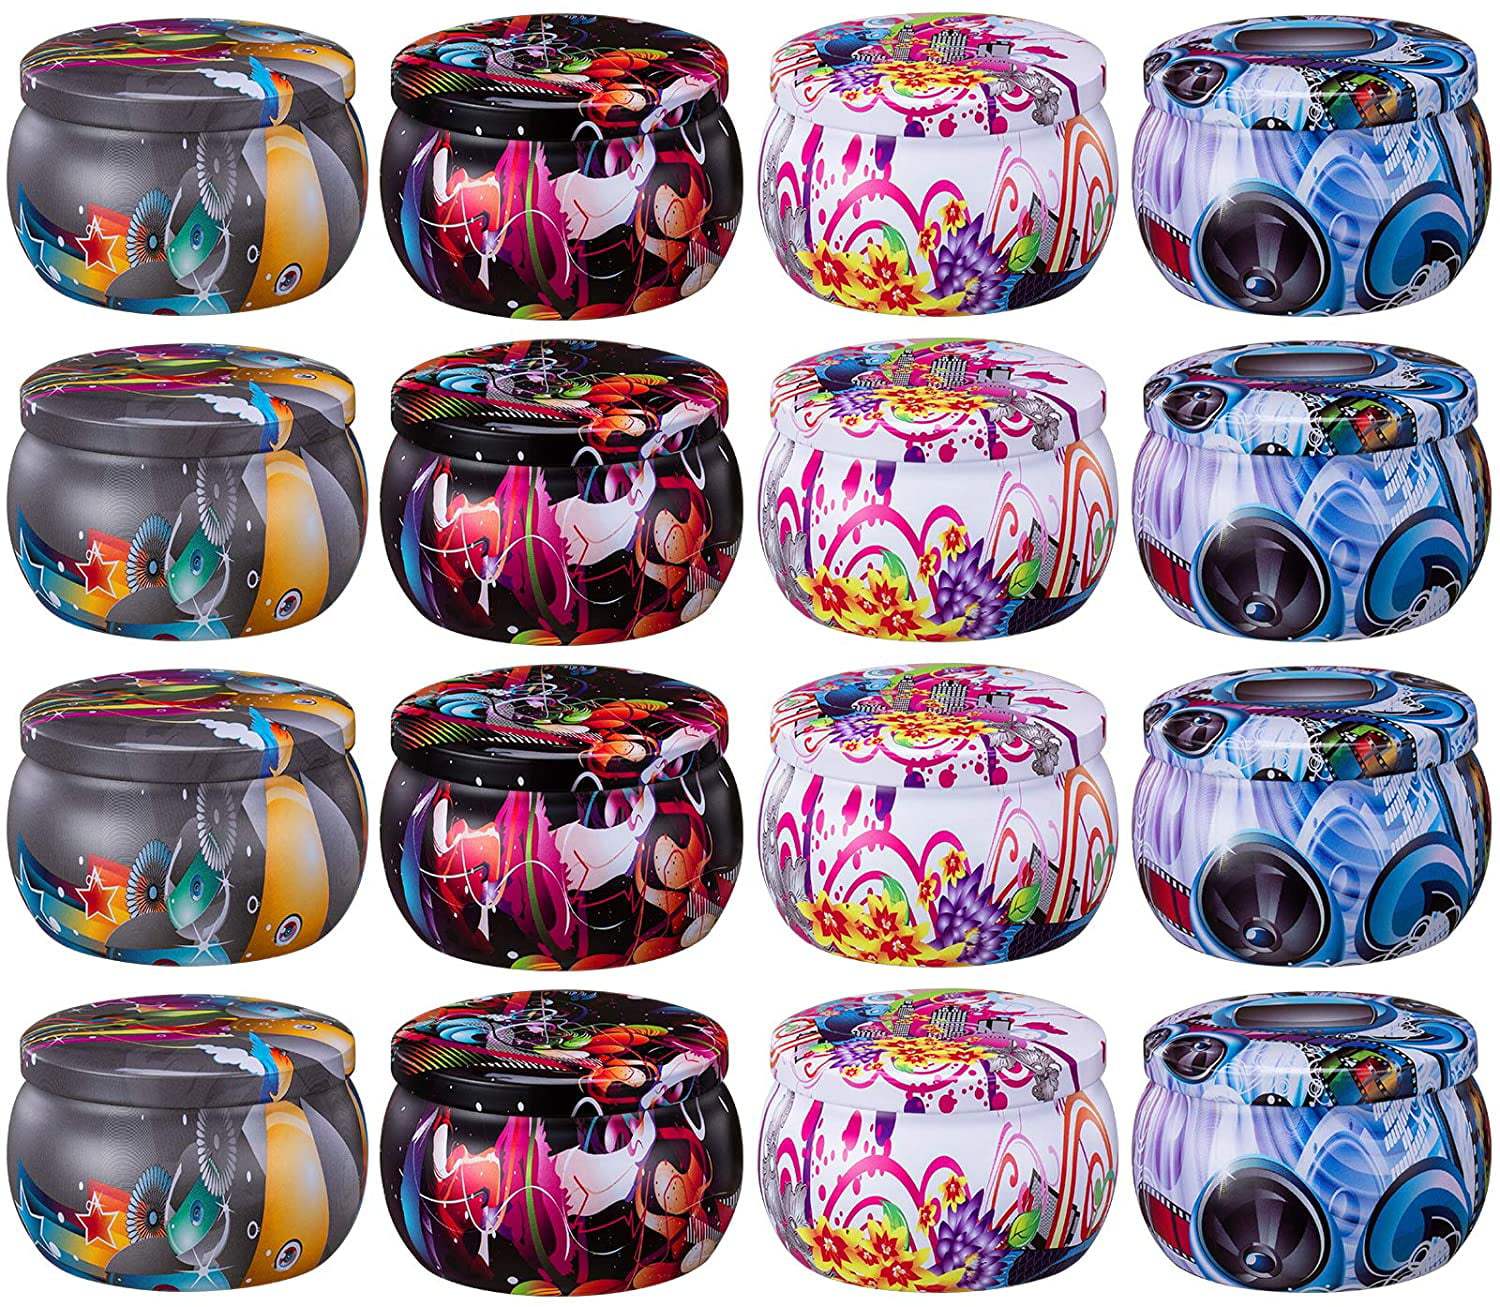 Candle Making Opeshar 16 PCS DIY Candle Tins Craft Tools Round Containers with Slip-On Lids for Party Favors Gifts Spices 